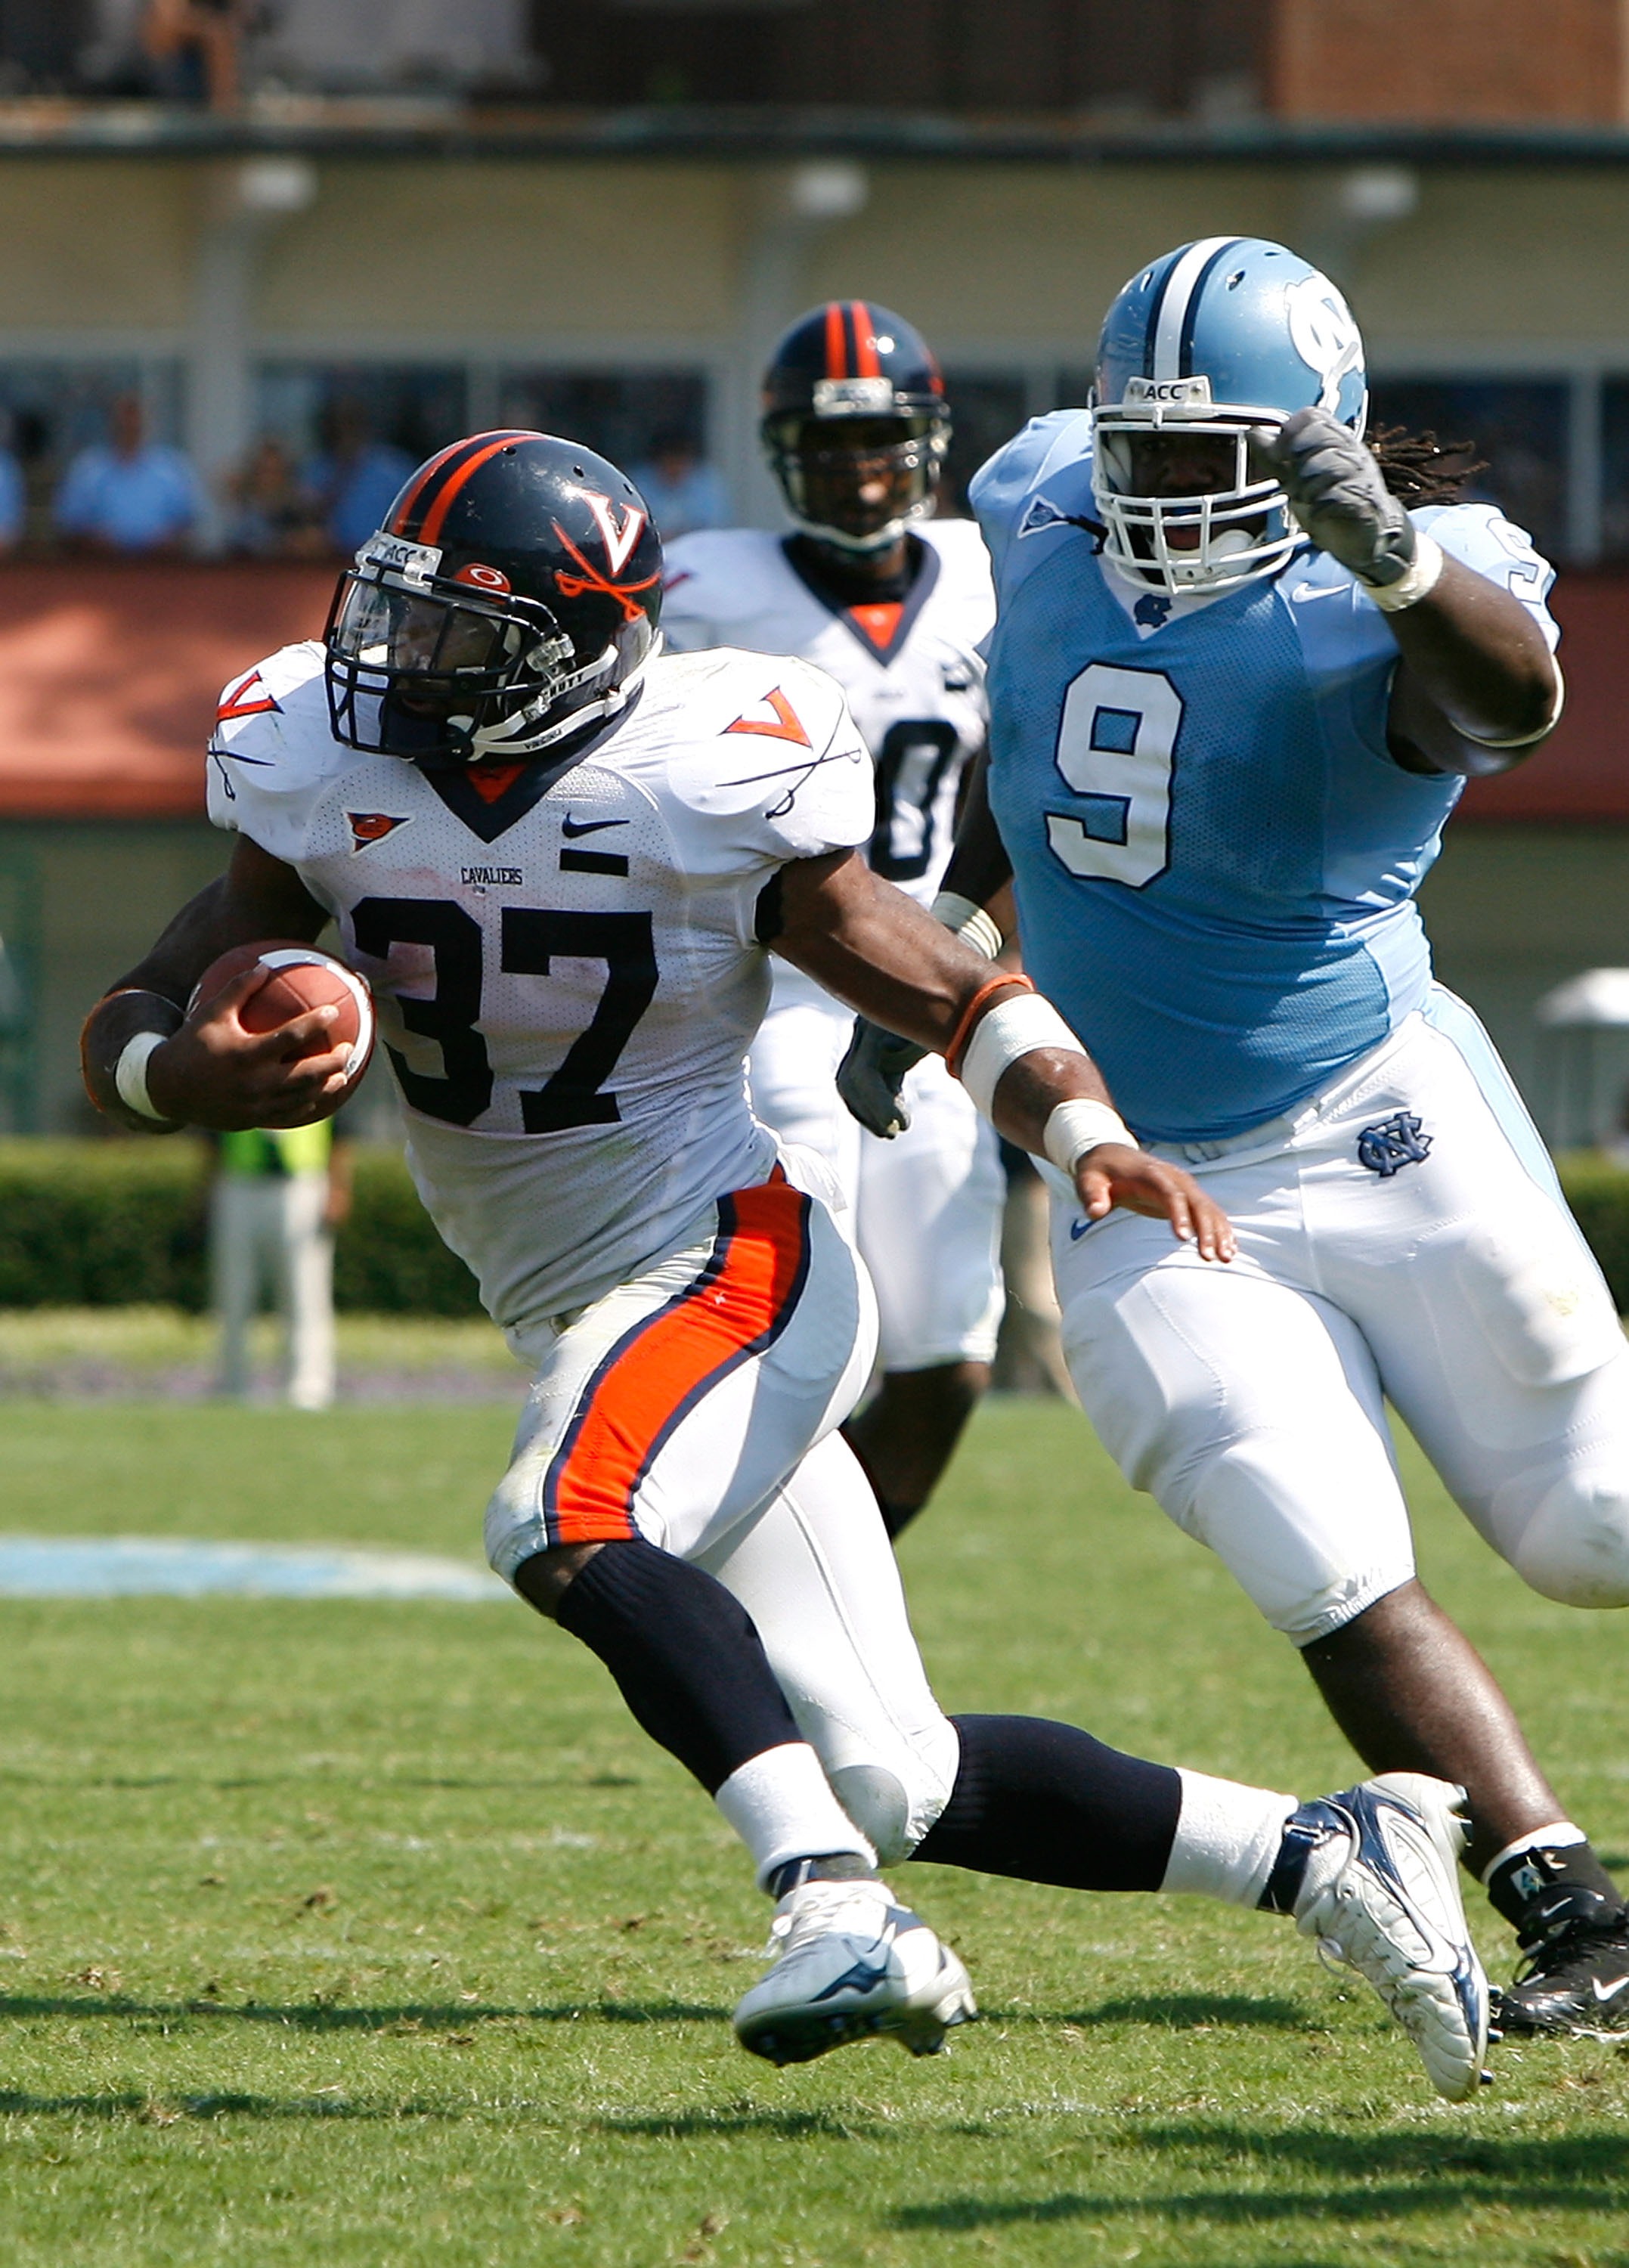 CHAPEL HILL, NC - SEPTEMBER 15:  Tailback Cedric Peerman #37 of the Virginia Cavaliers rushes away from defensive tackle Marvin Austin #9 of the North Carolina Tar Heels during the Cavaliers 22-20 win in their Atlantic Coast Conference football game at Ke